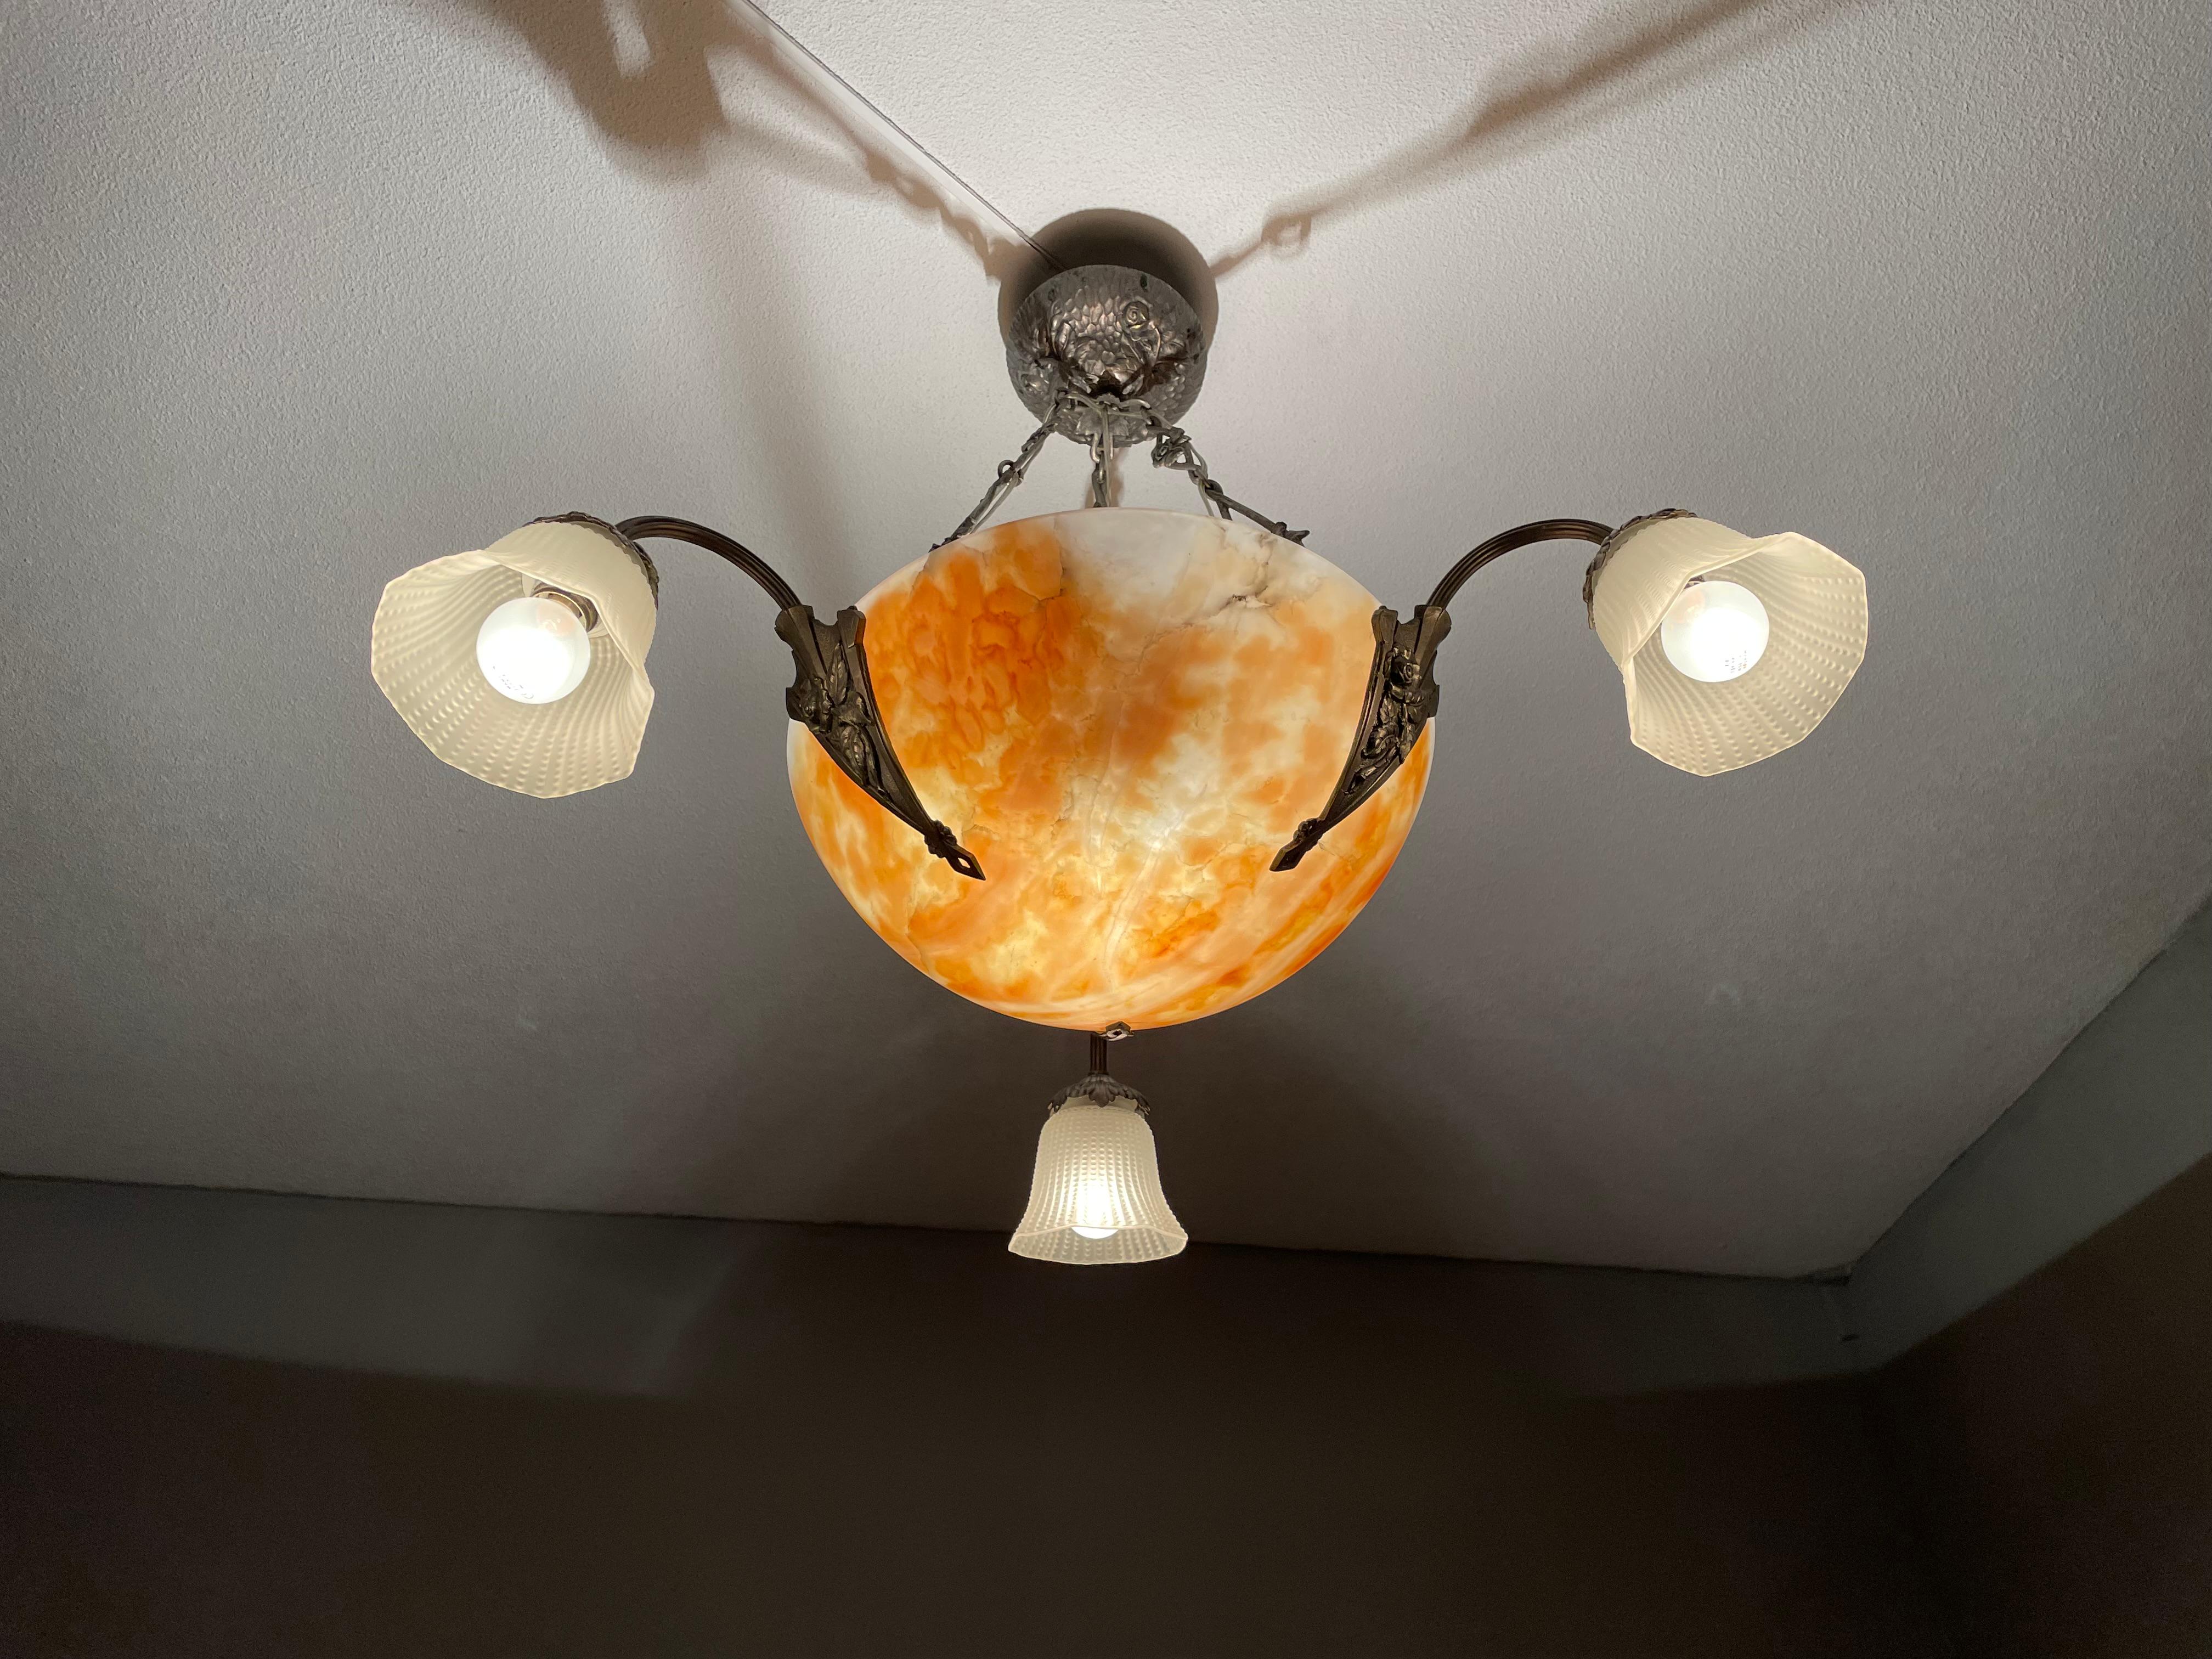 Truly elegant, four light, alabaster pendant with nickel plated rose sculptures.

This outstanding and highly stylish chandelier originates from early twentieth century France and to have found it in this superb condition again felt like a